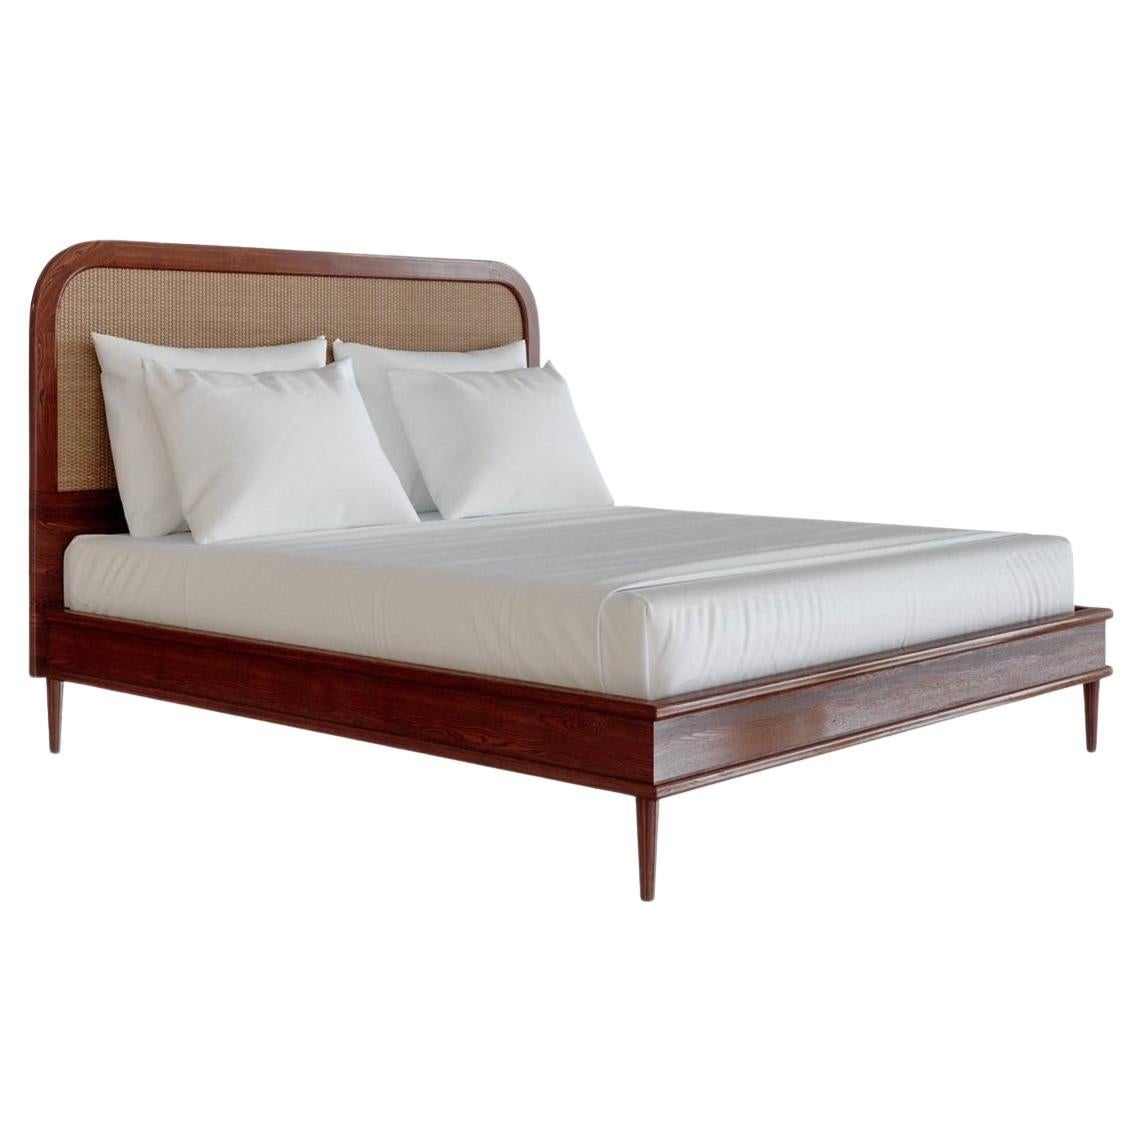 Walford Bed in Rattan & Cognac — Euro Super King For Sale